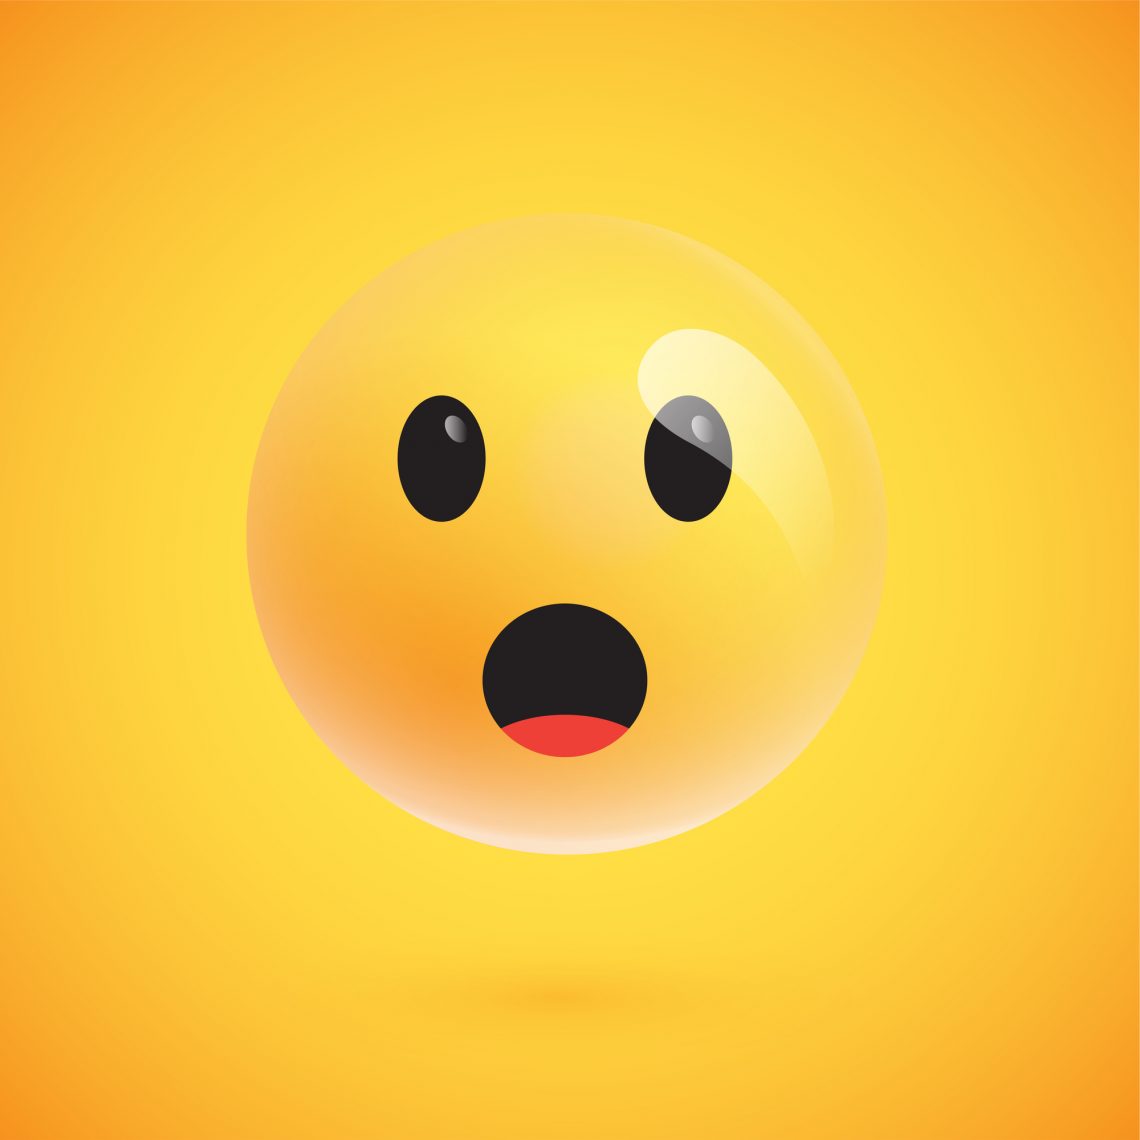 Realistic yellow emoticon in front of a yellow background, vecto